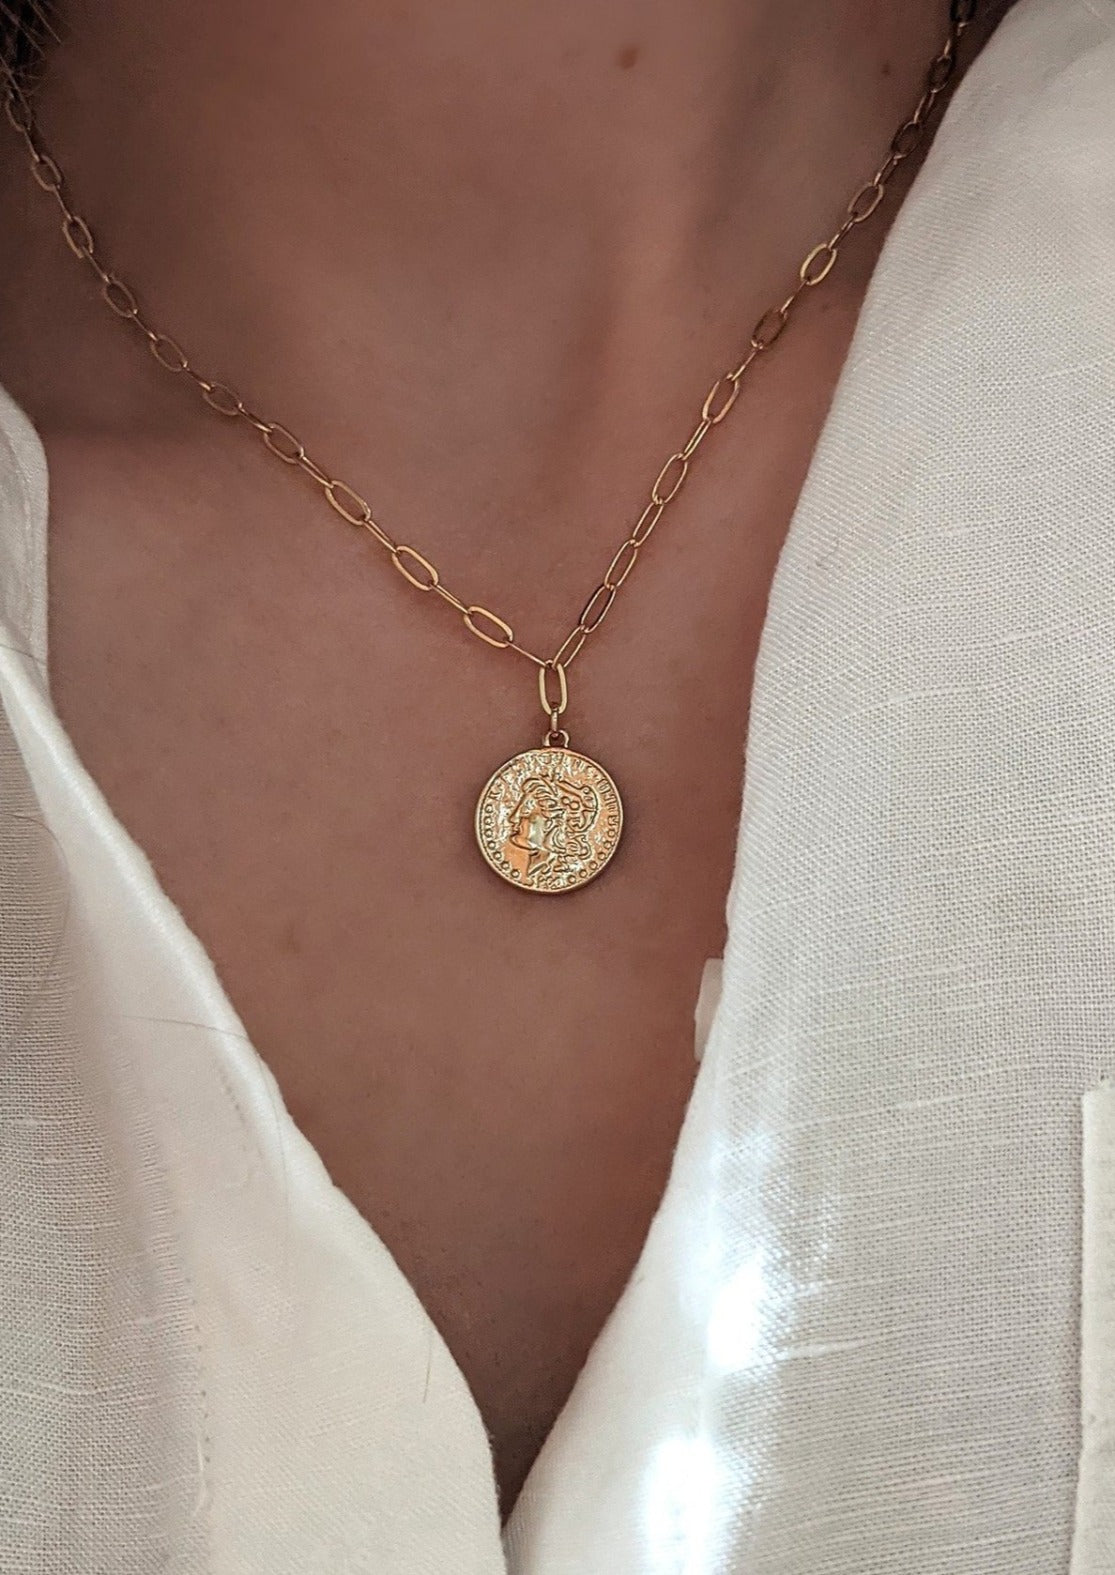 Buy Gold Coin Necklace Set / Ottoman Coin Necklace / Turkish Coin Necklace  / Round Gold Medallion, Gold Disc Pendant / Simple Jewelry Online in India  - Etsy